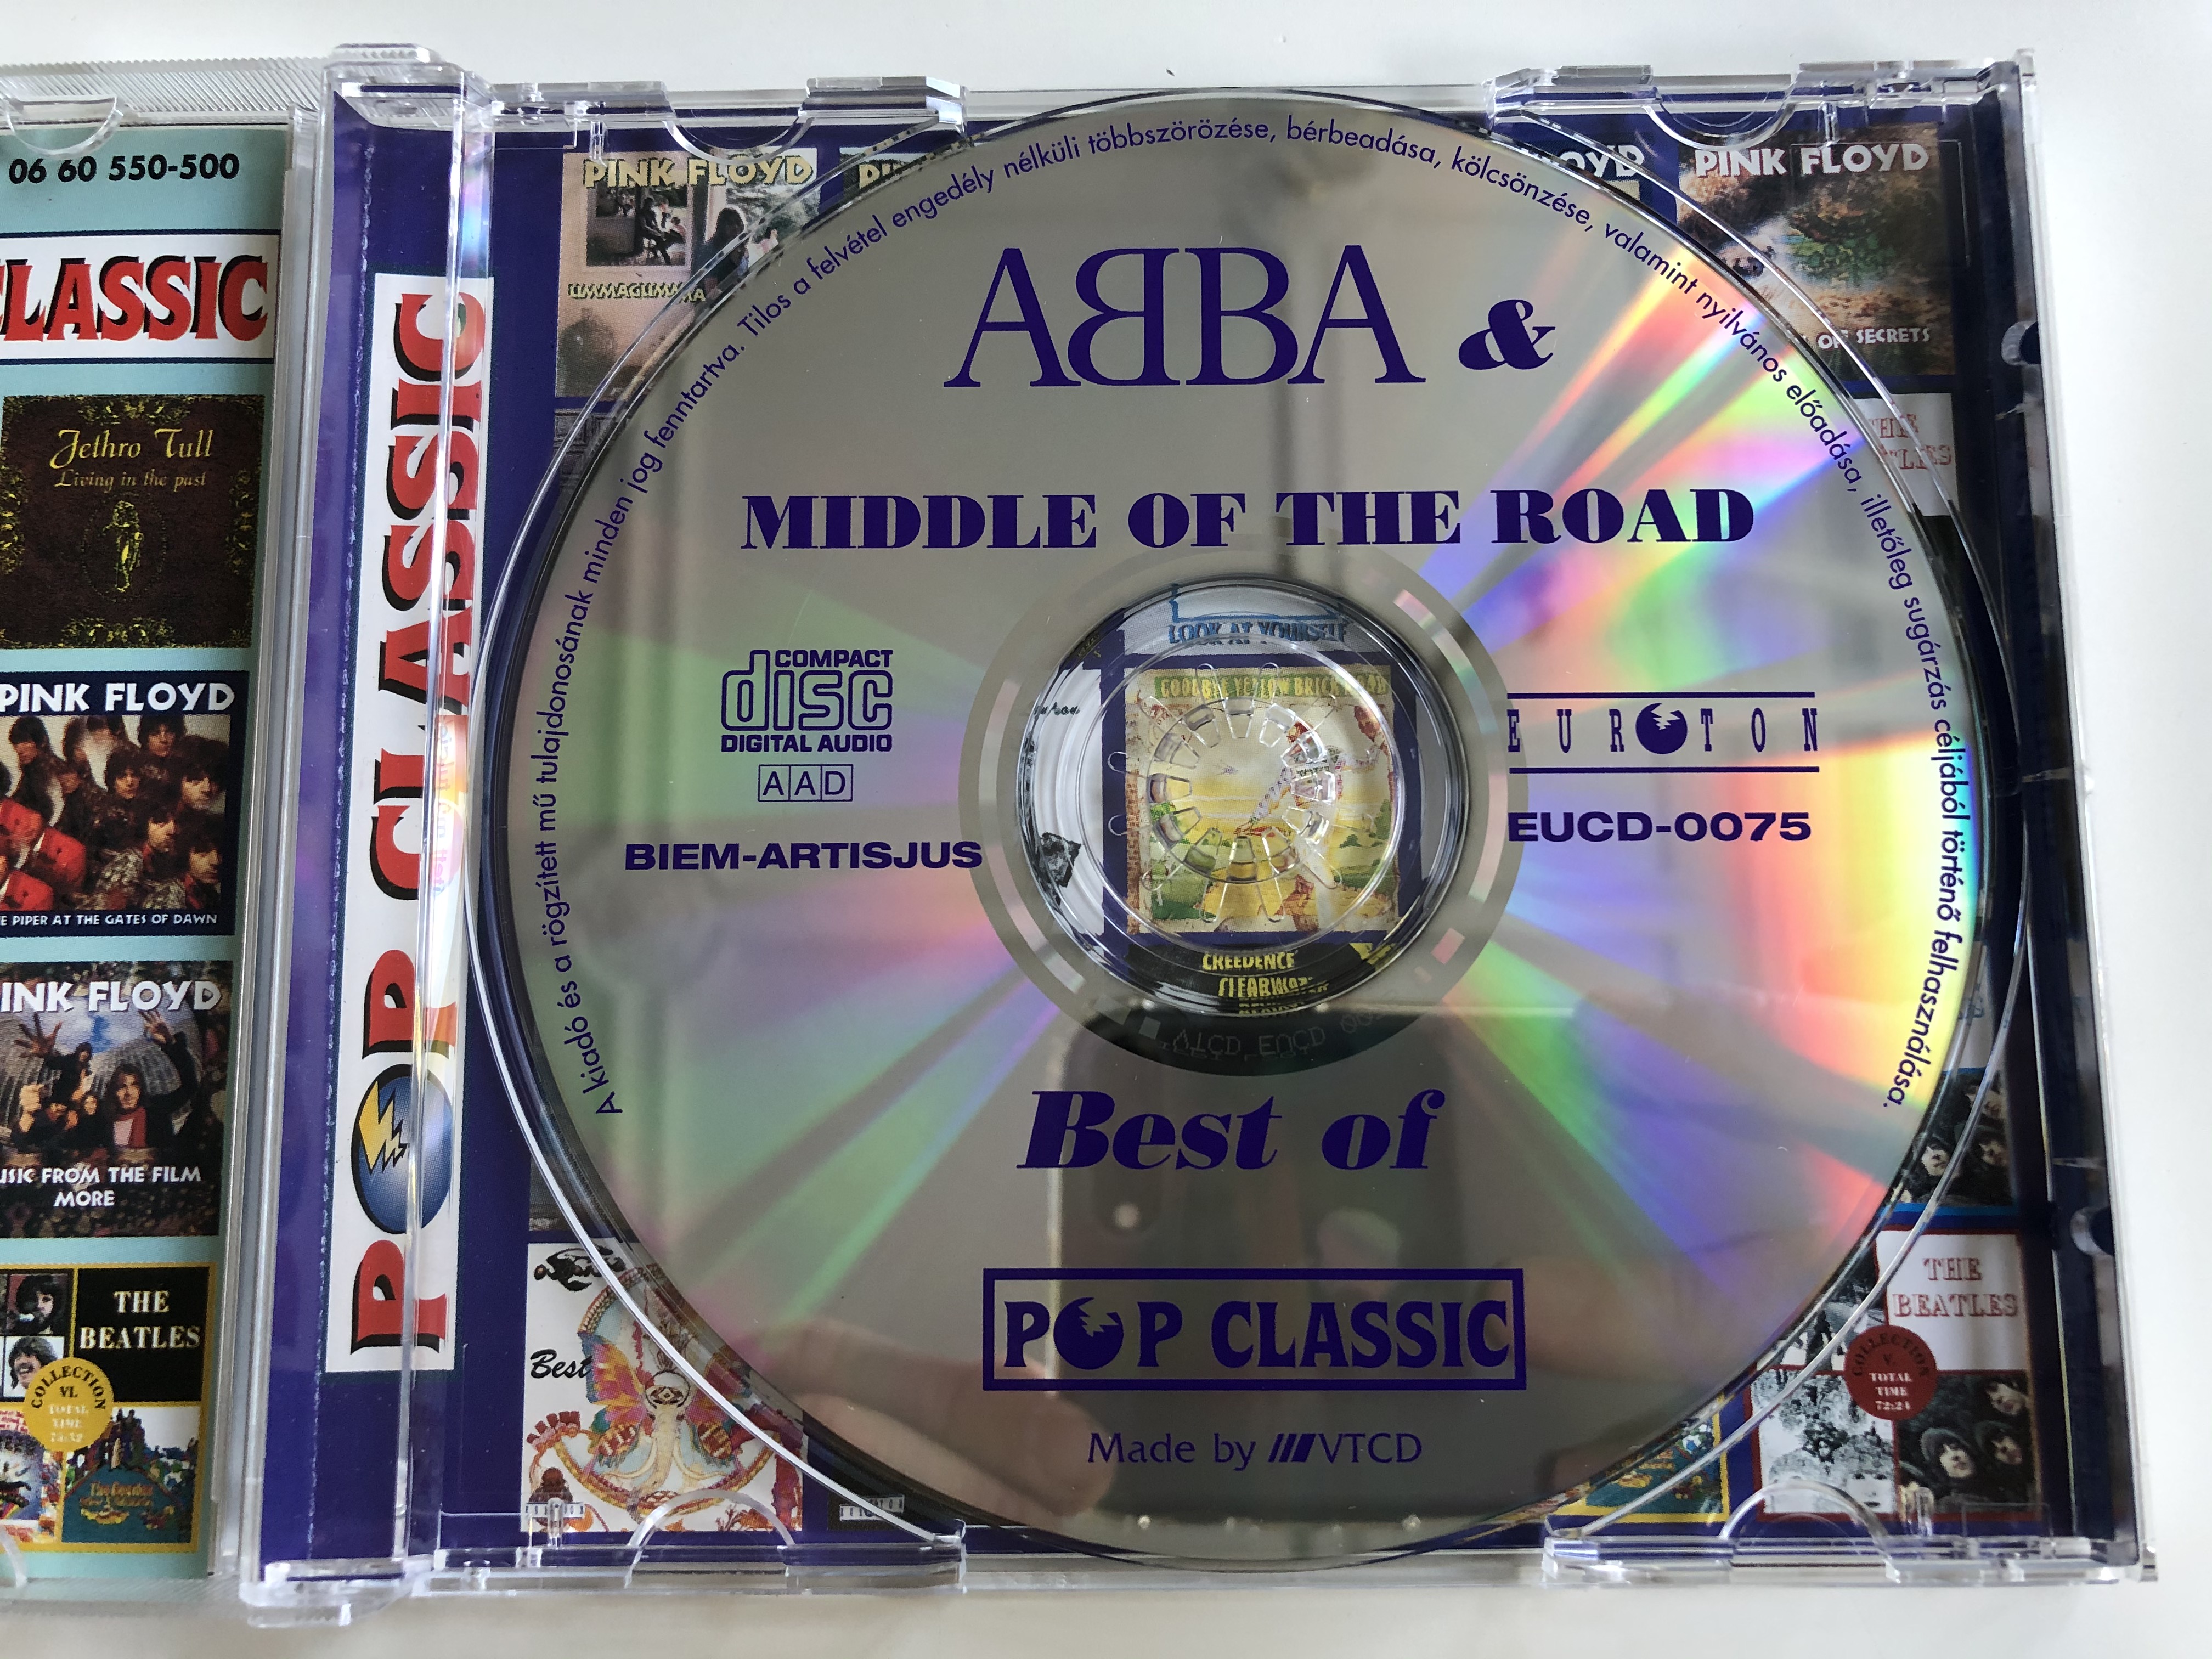 abba-middle-of-the-road-best-of-pop-classic-euroton-audio-cd-eucd-0075-2-.jpg